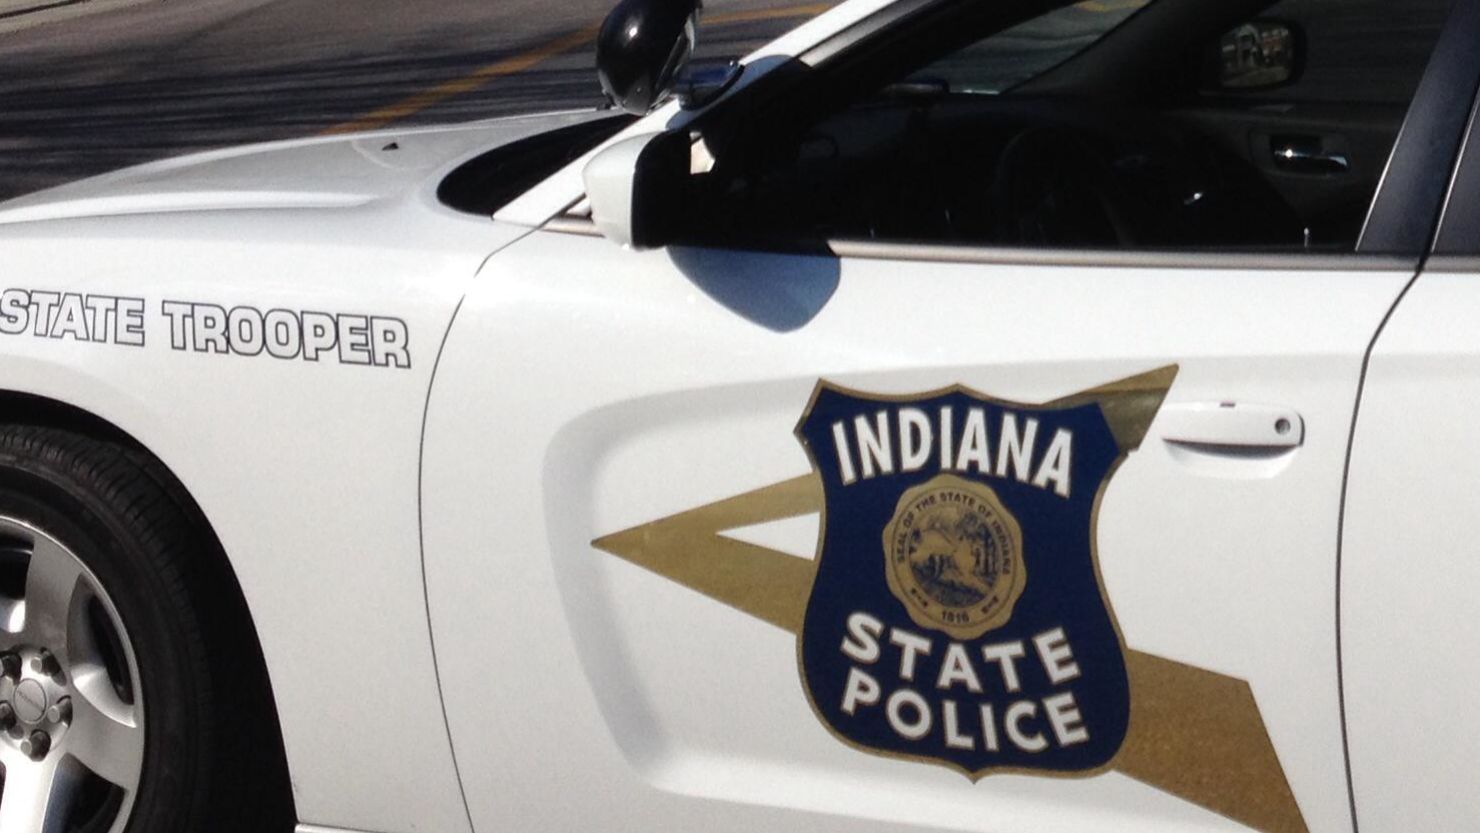 An Indiana state police patrol car.